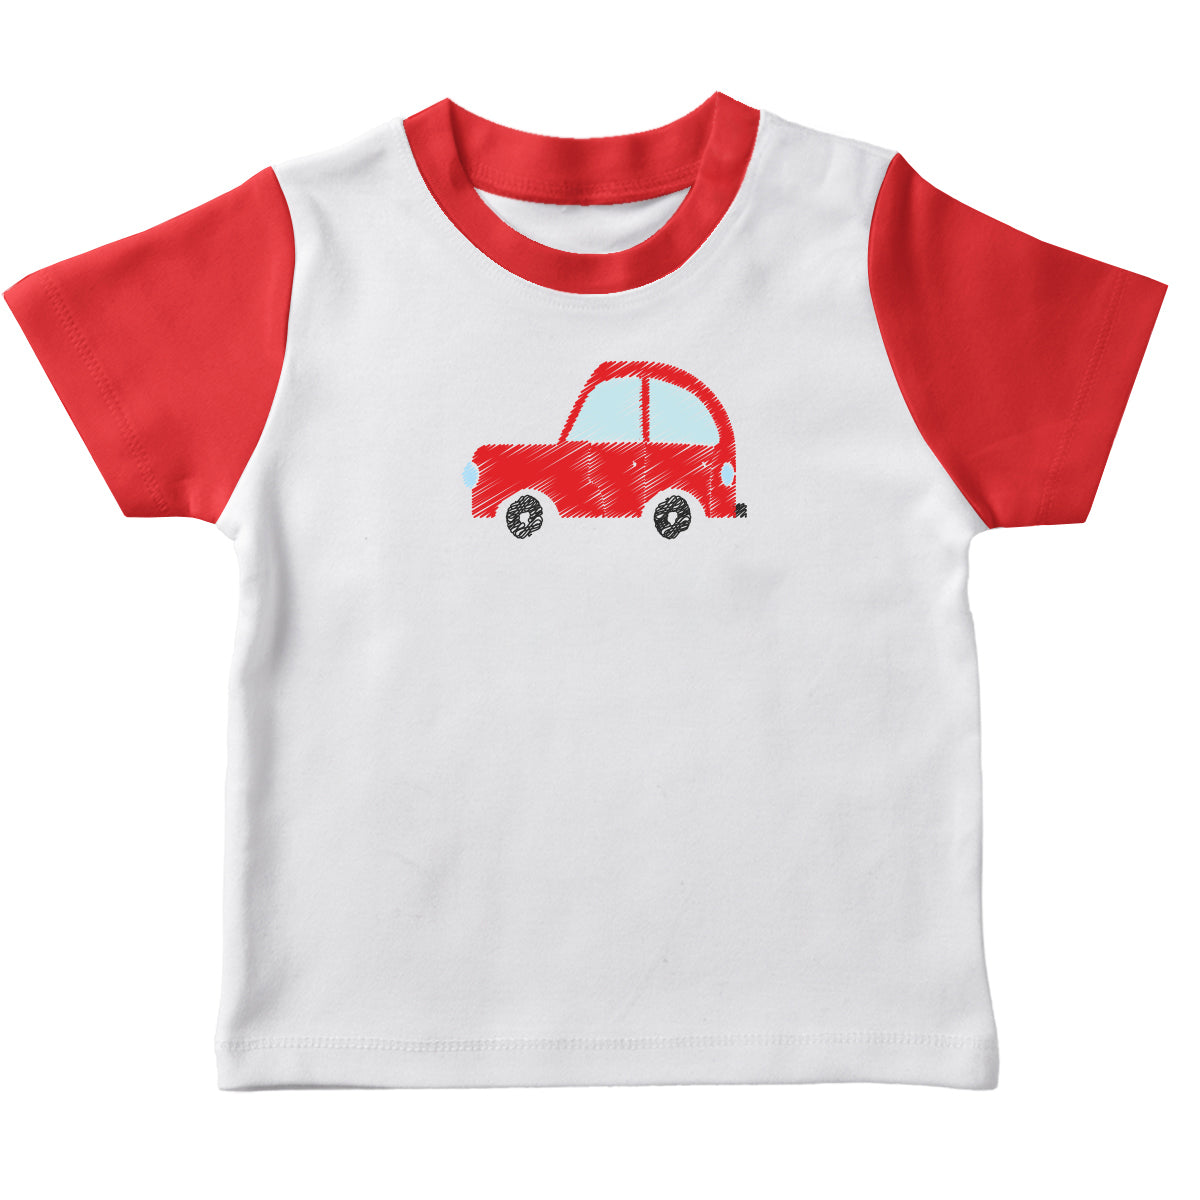 Car Name White And Red Short Sleeve Tee Shirt - Wimziy&Co.